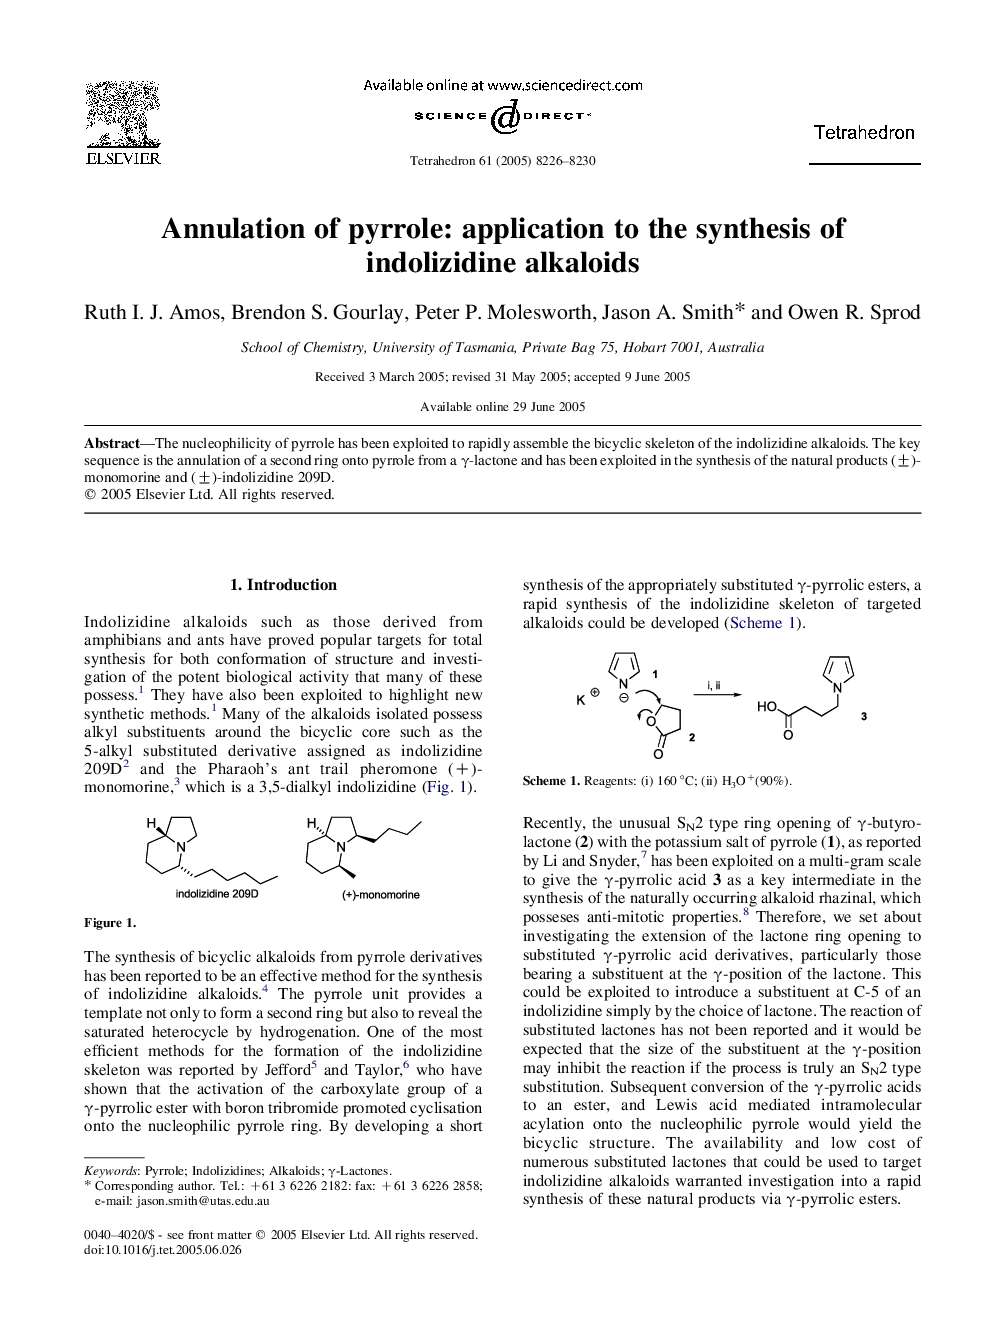 Annulation of pyrrole: application to the synthesis of indolizidine alkaloids